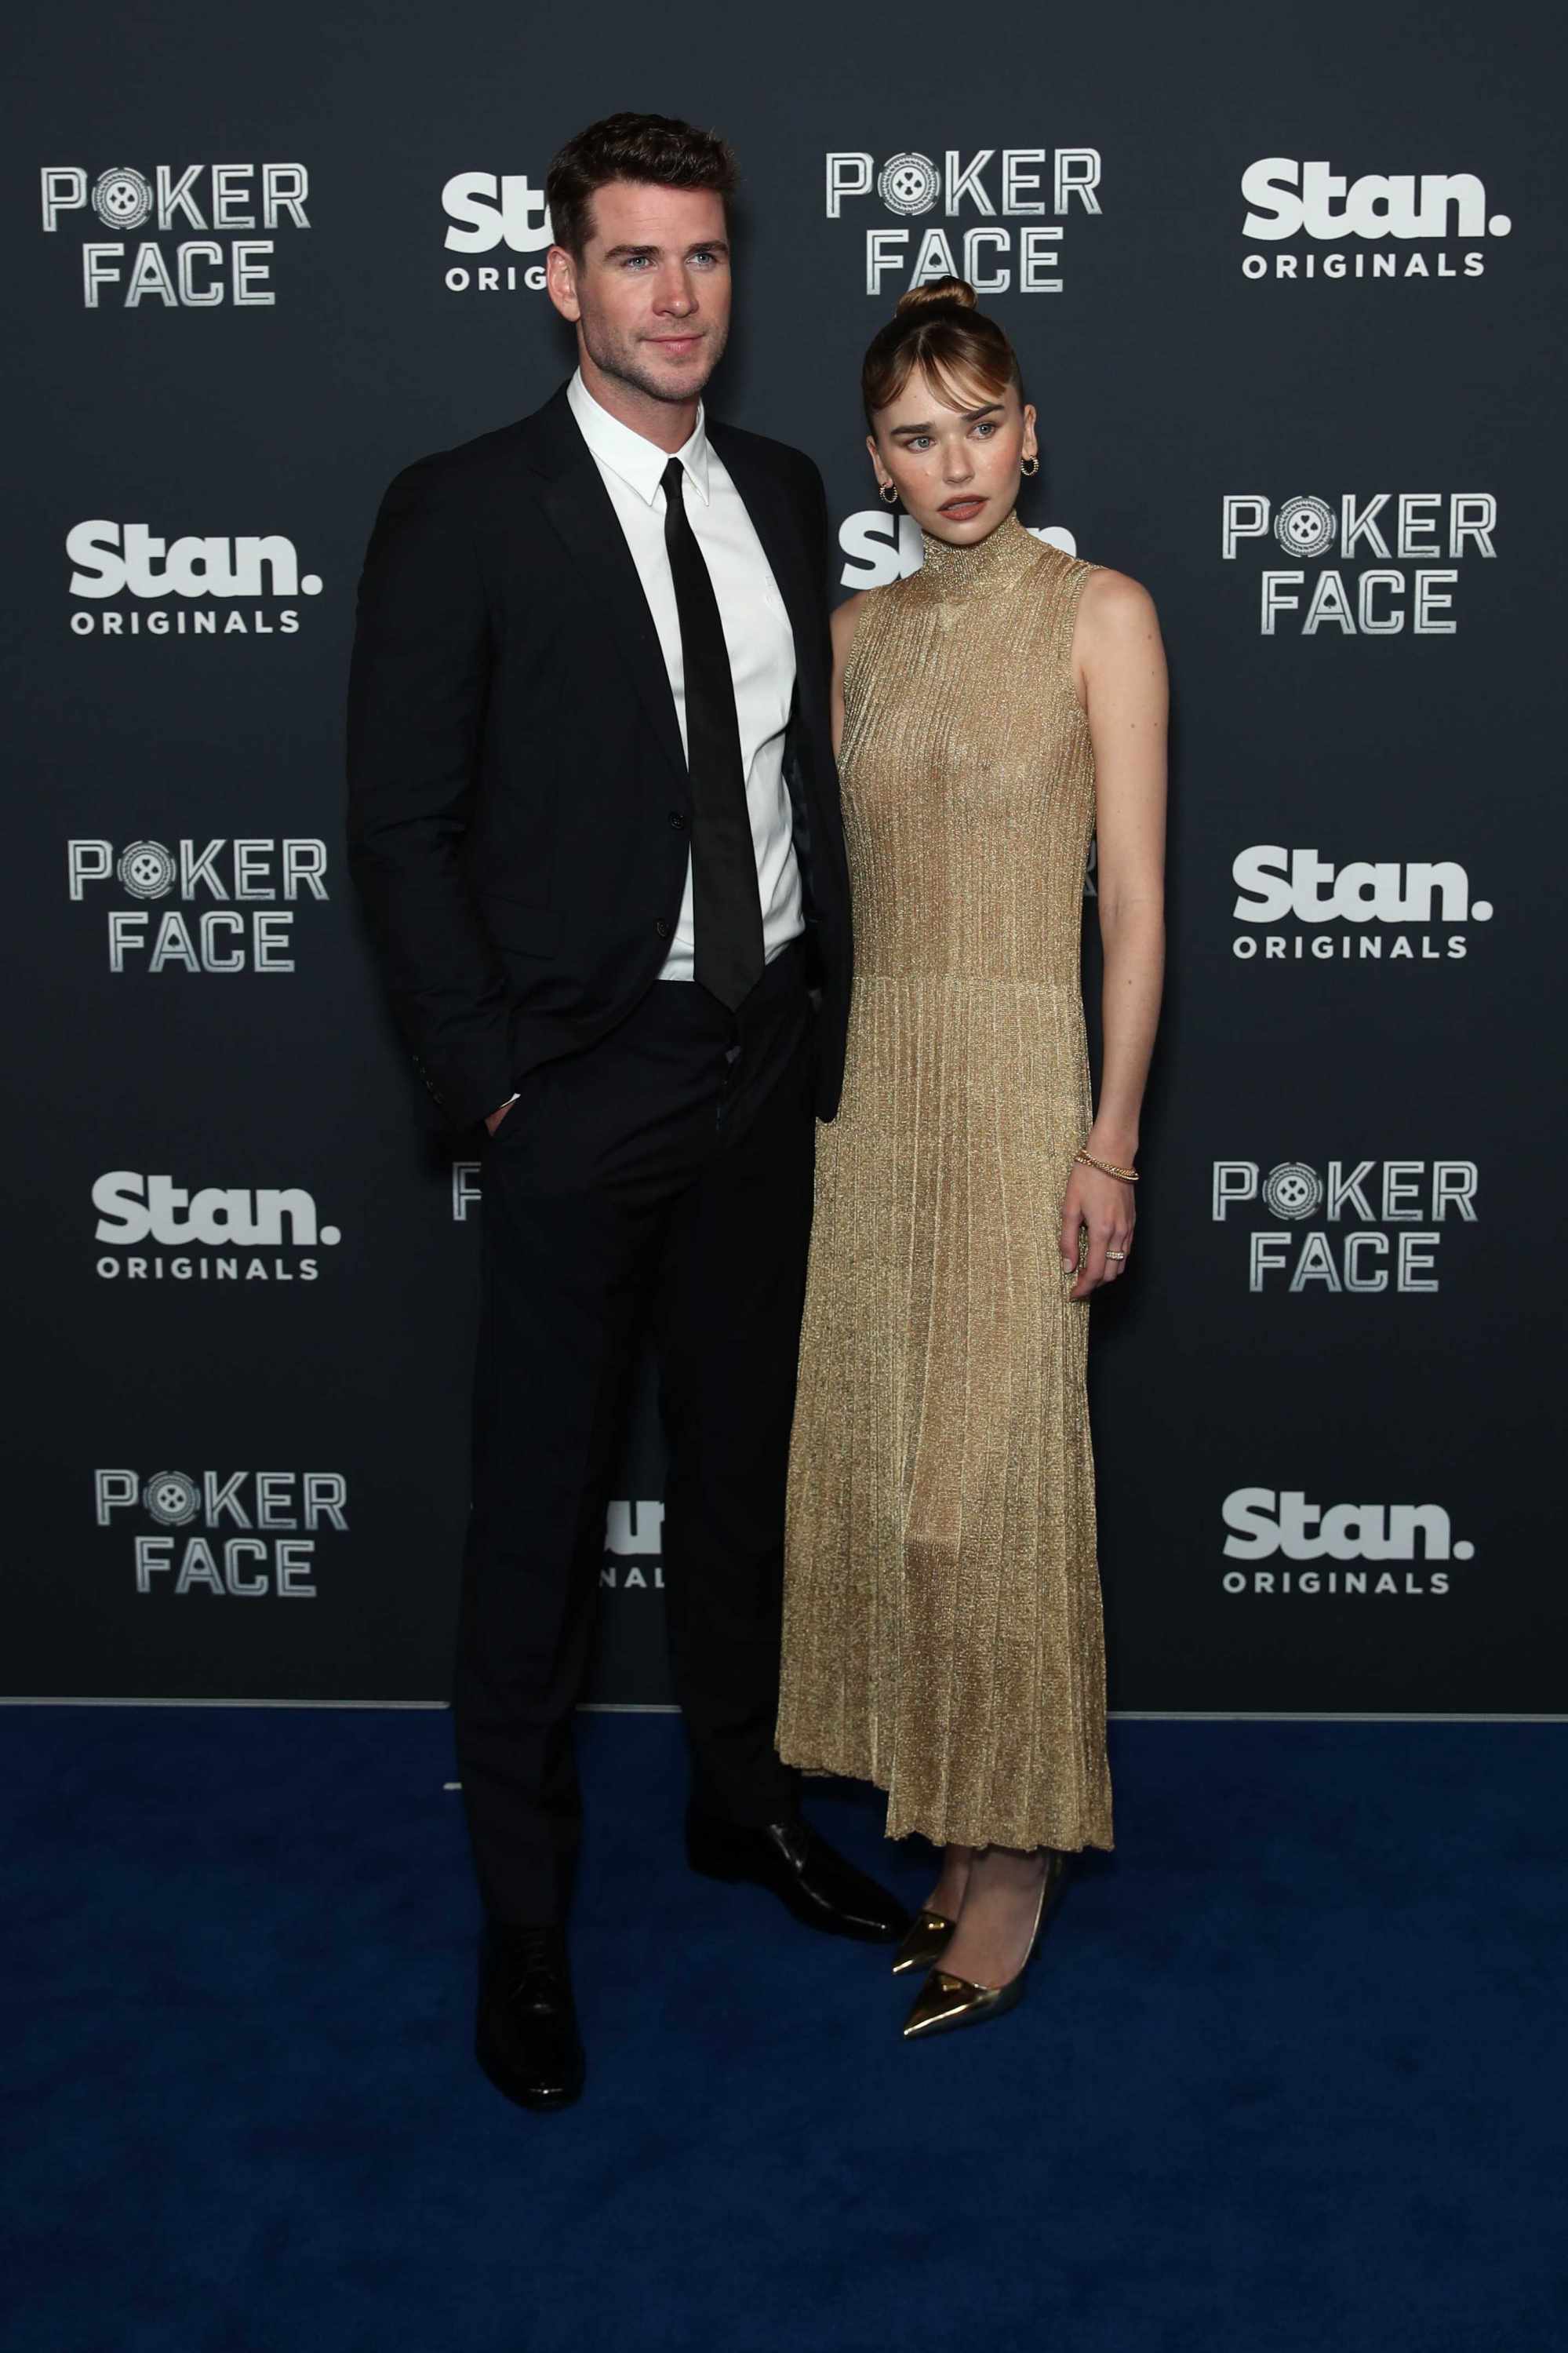 Meet Liam Hemsworth's gorgeous girlfriend, Gabriella Brooks: The Witcher  star and Calvin Klein model just made their red-carpet debut at Poker  Face's premiere after 3 years of dating